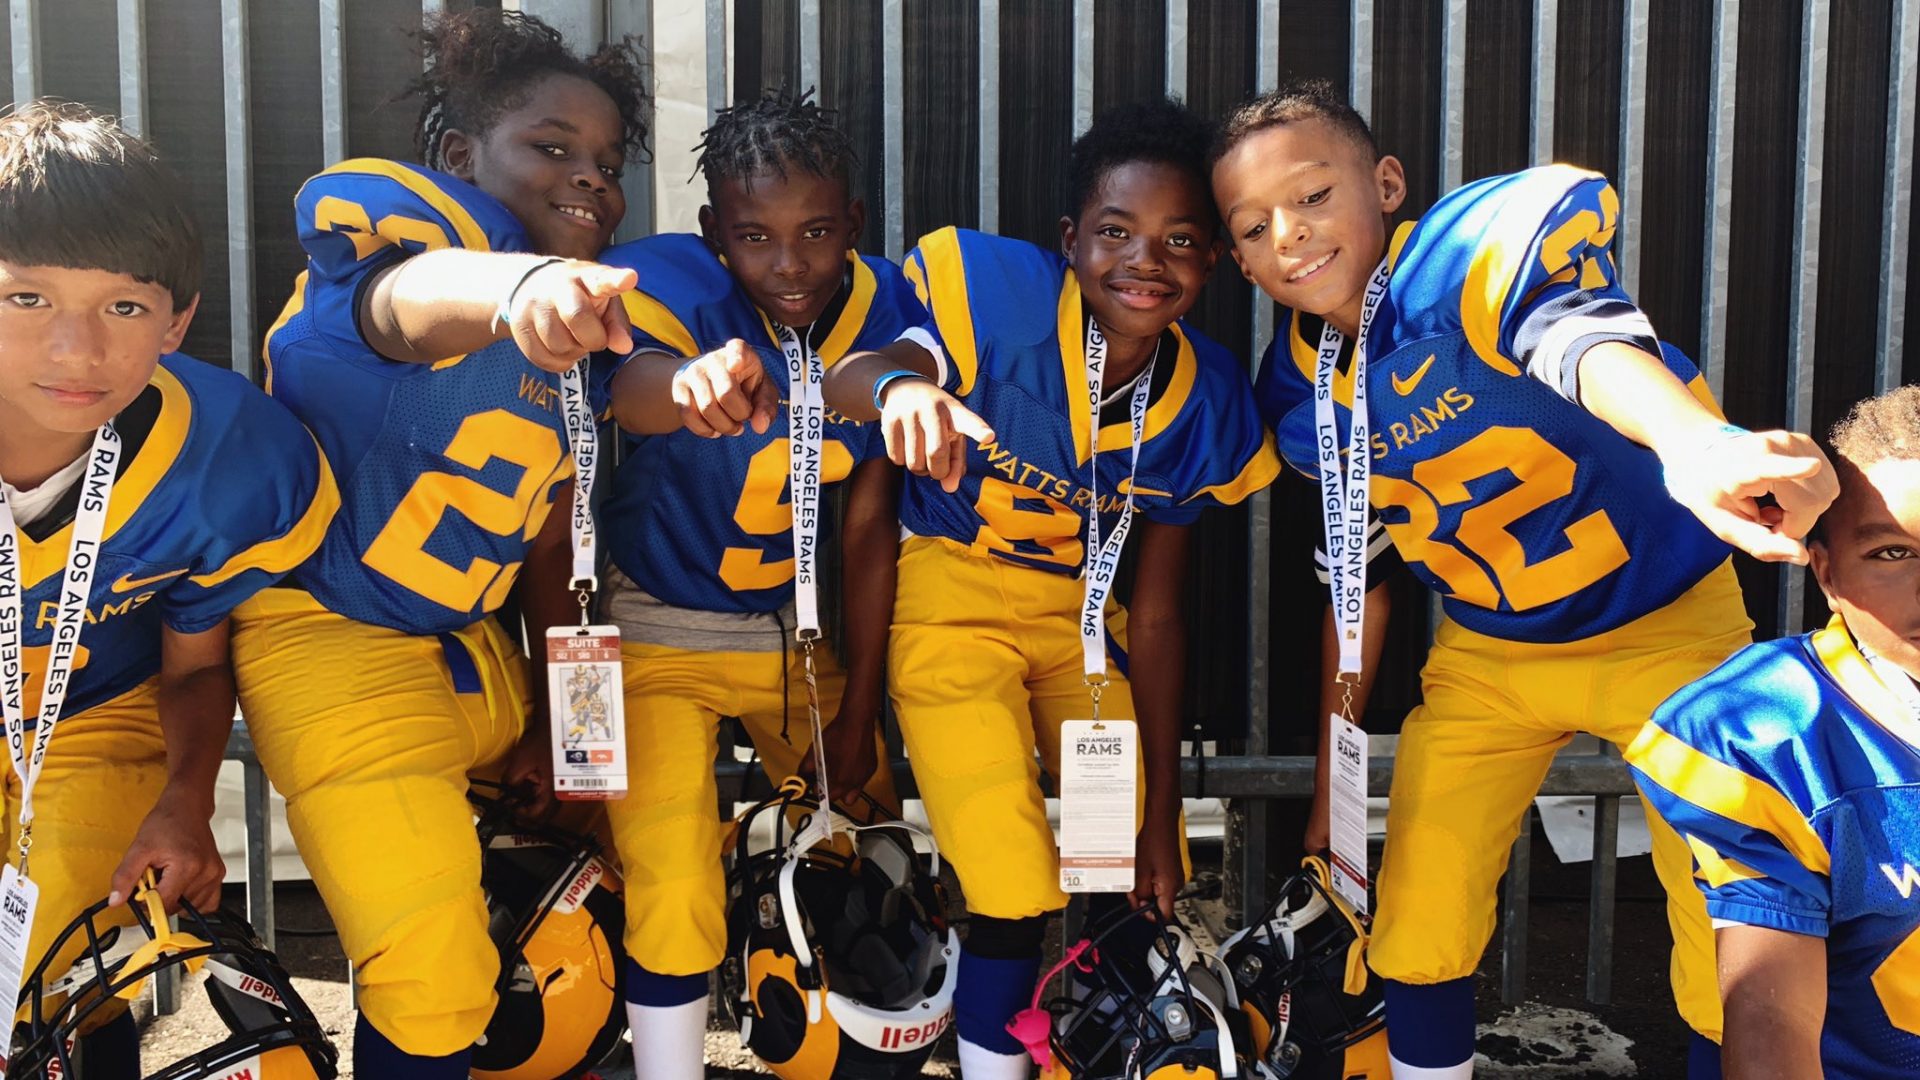 A group of young people in football uniforms.